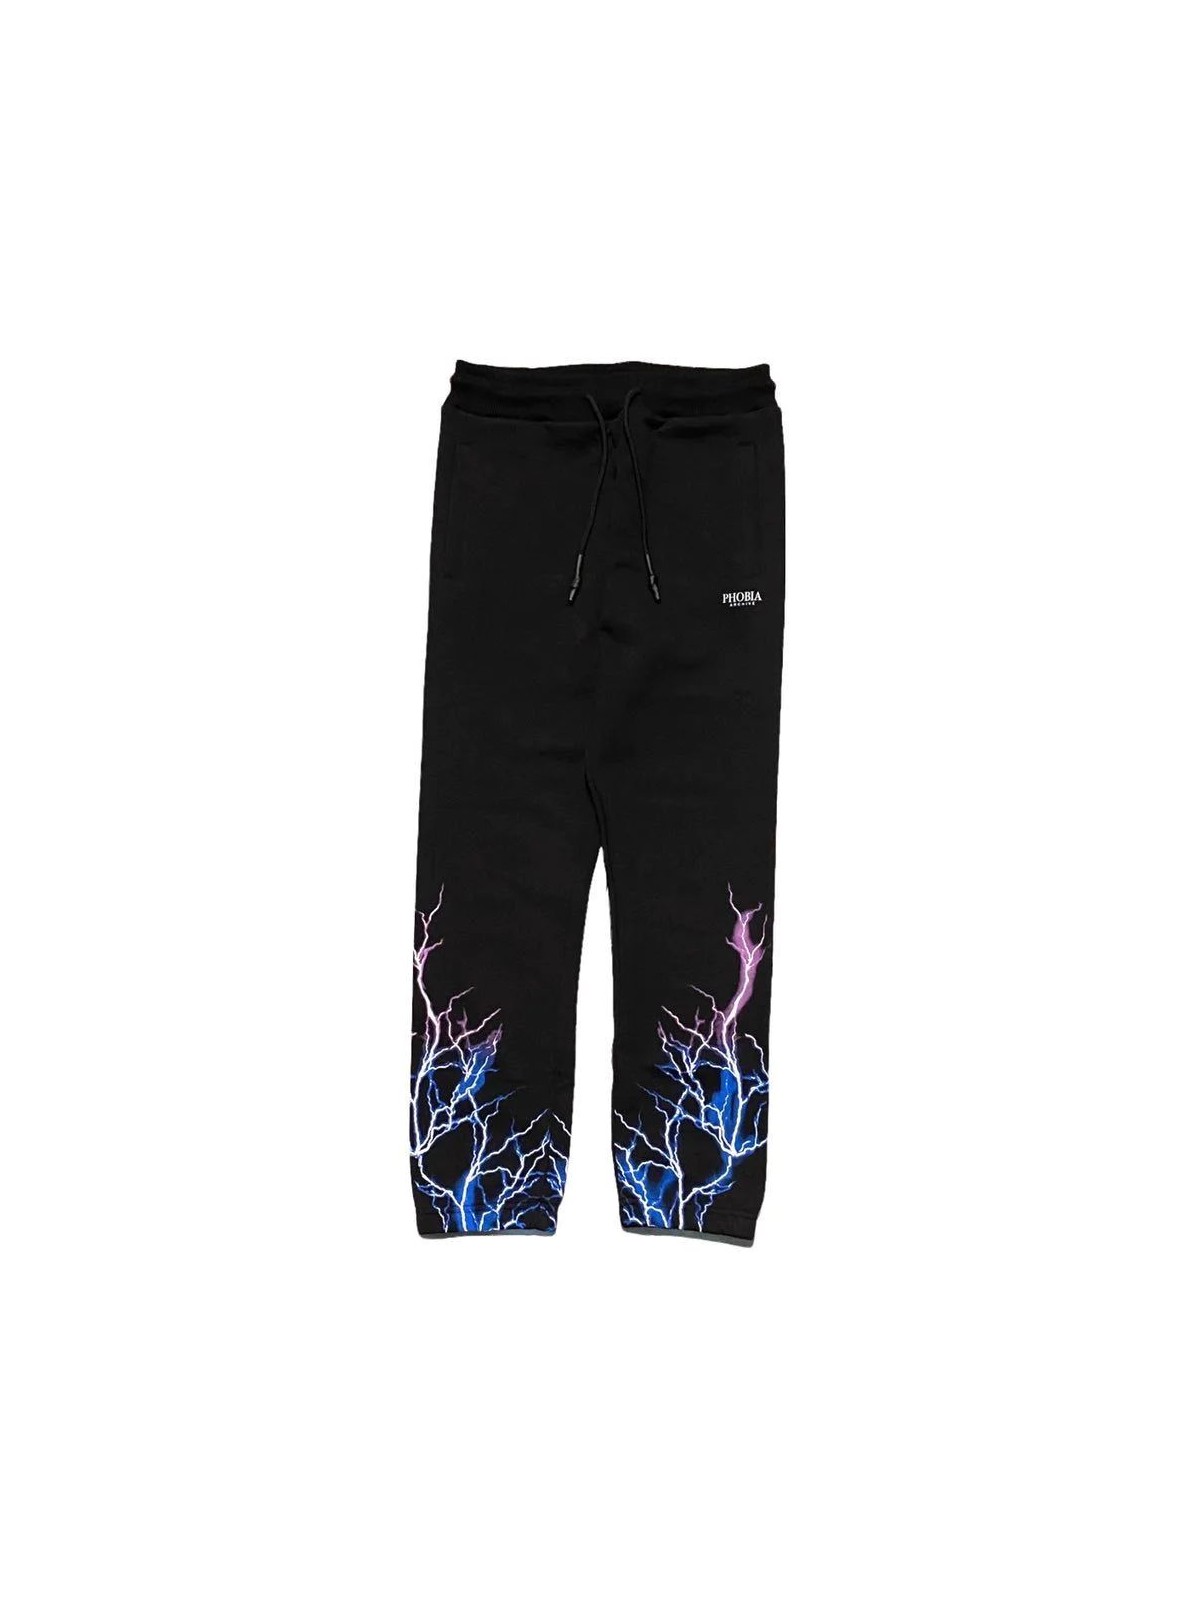 BLACK PANTS WITH BLUE AND PURPLE LIGHTNING